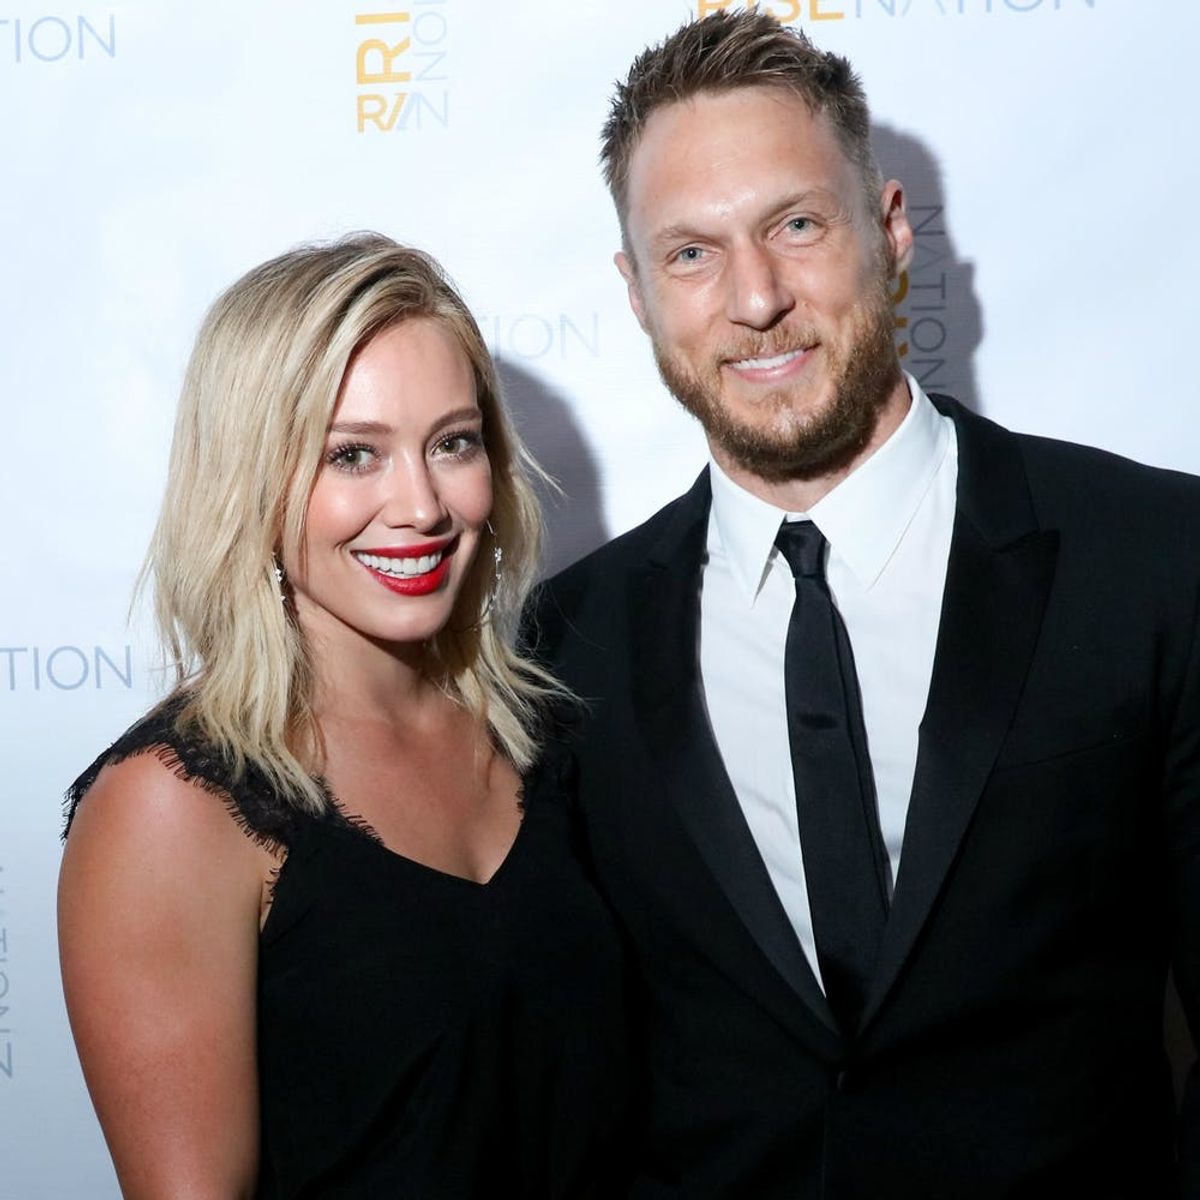 The Reason Hilary Duff and Jason Walsh Are No Longer a Thing Is Totally Relatable